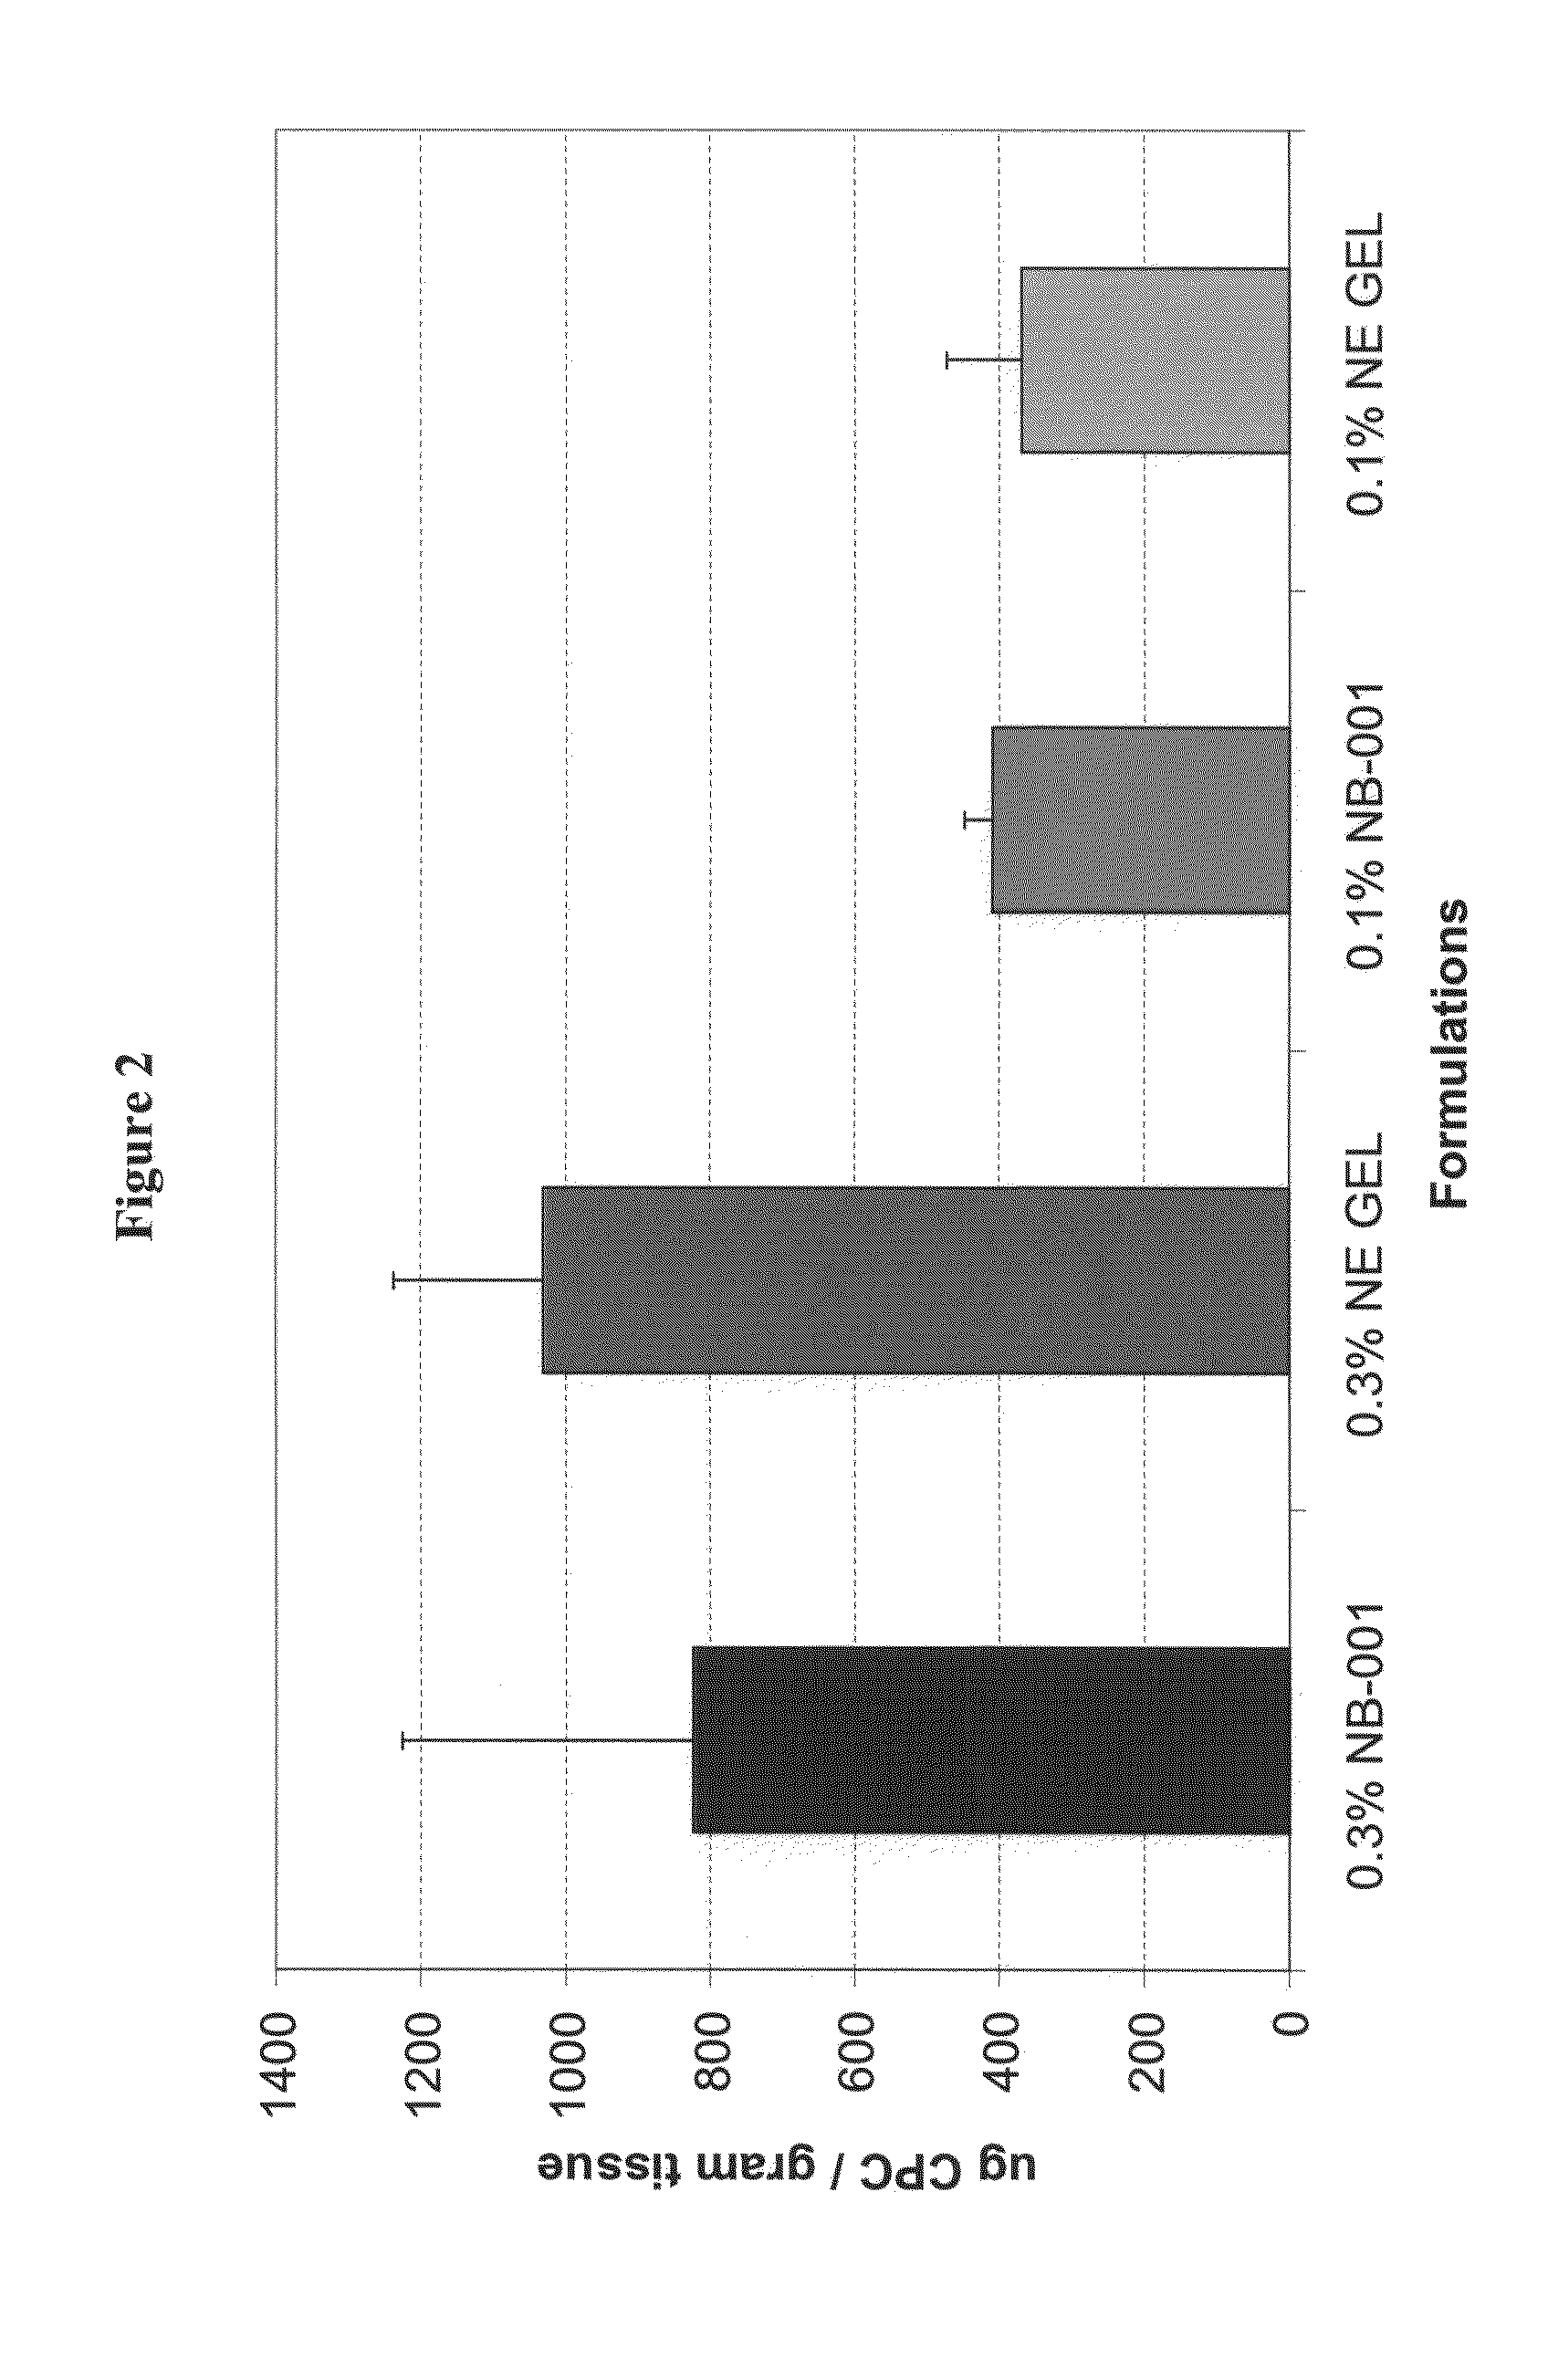 Compositions for treatment and prevention of acne, methods of making the compositions, and methods of use thereof